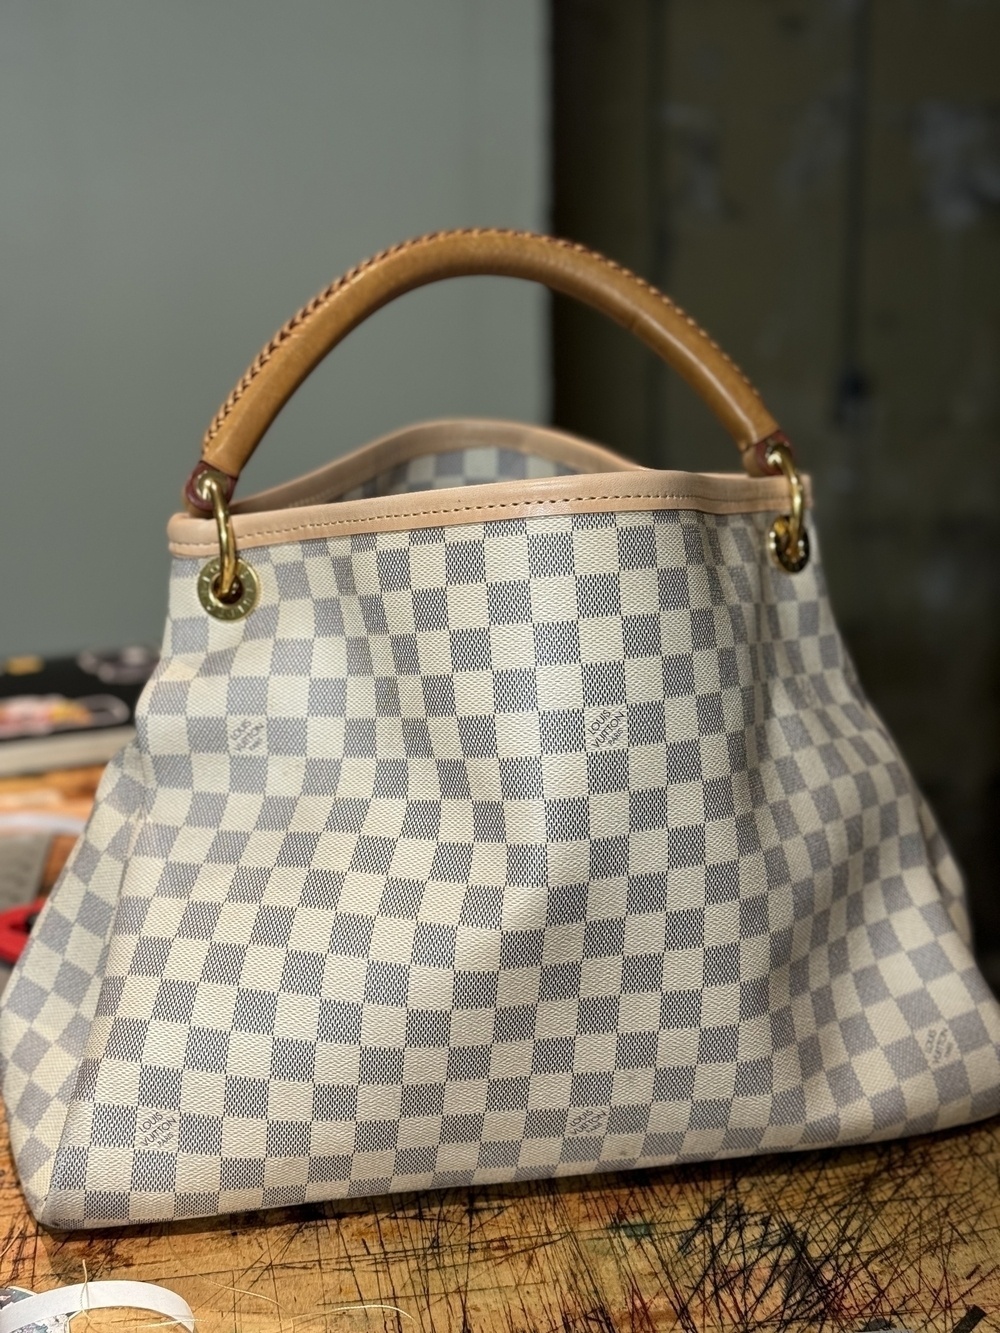 A checkered handbag with a tan handle is placed on a wooden surface.